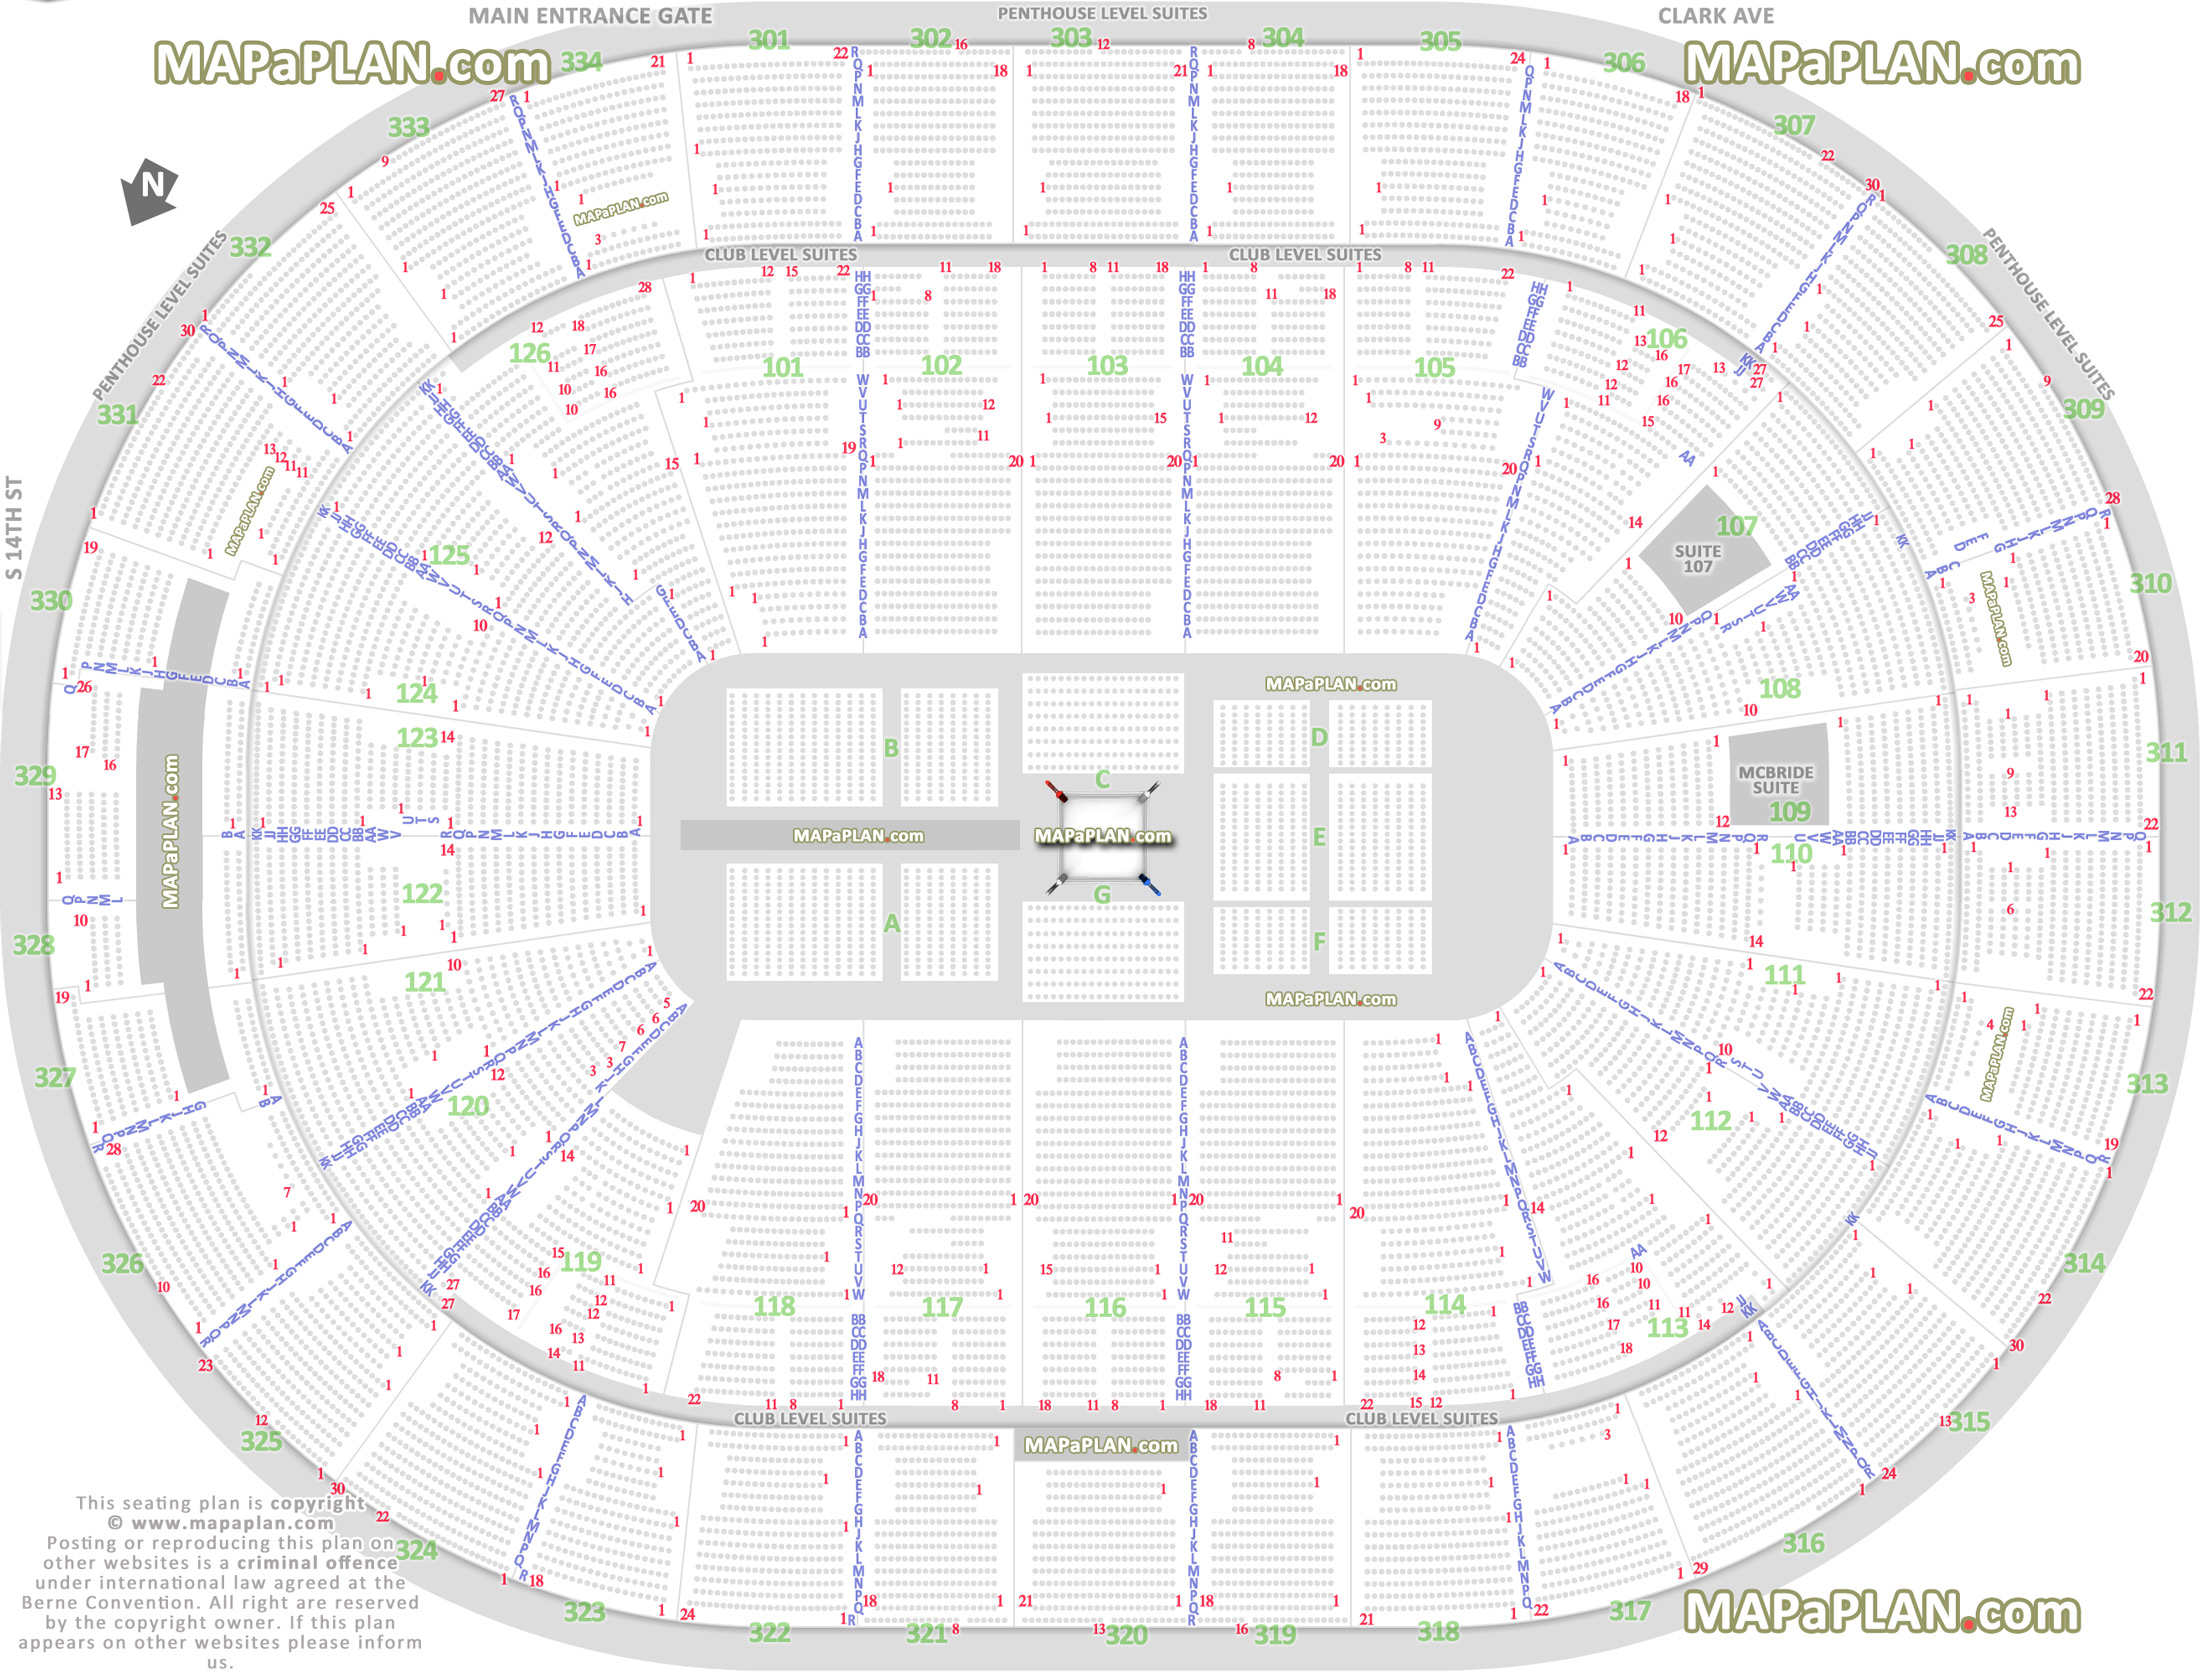 wwe raw smackdown live wrestling boxing match events 360 round ring configuration good bad worst seats executive hospitality rental suites level St. Louis Enterprise Center seating chart